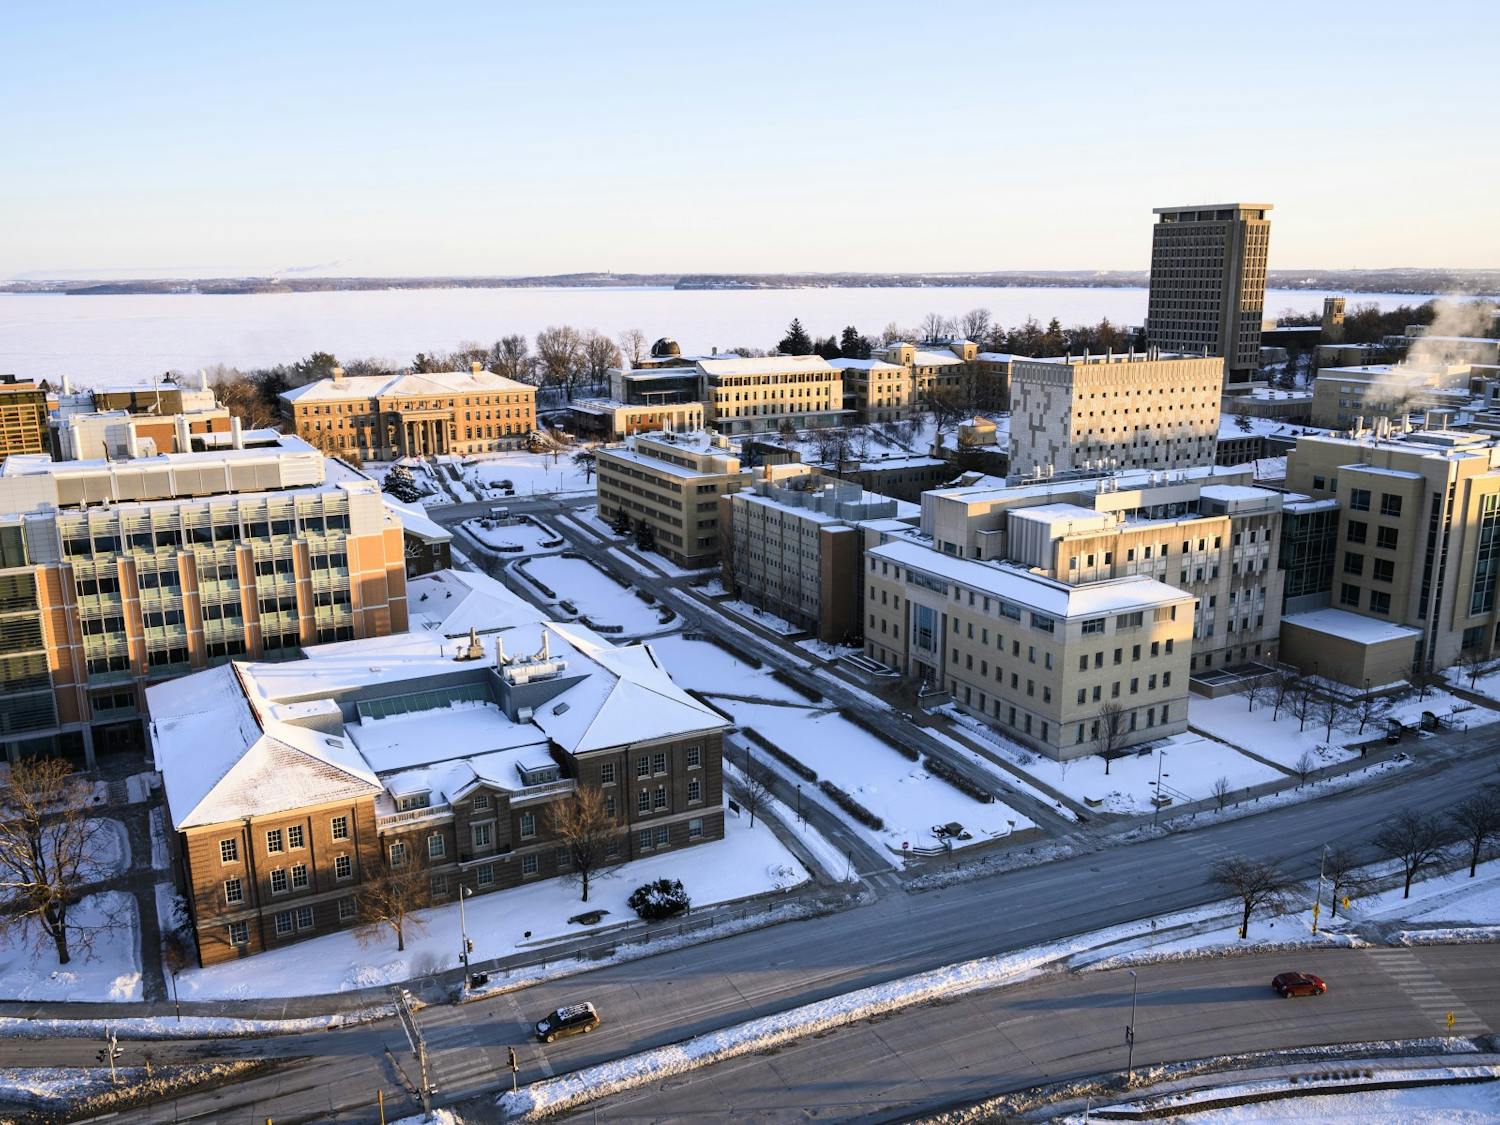 Aerial view of the UW-Madison campus